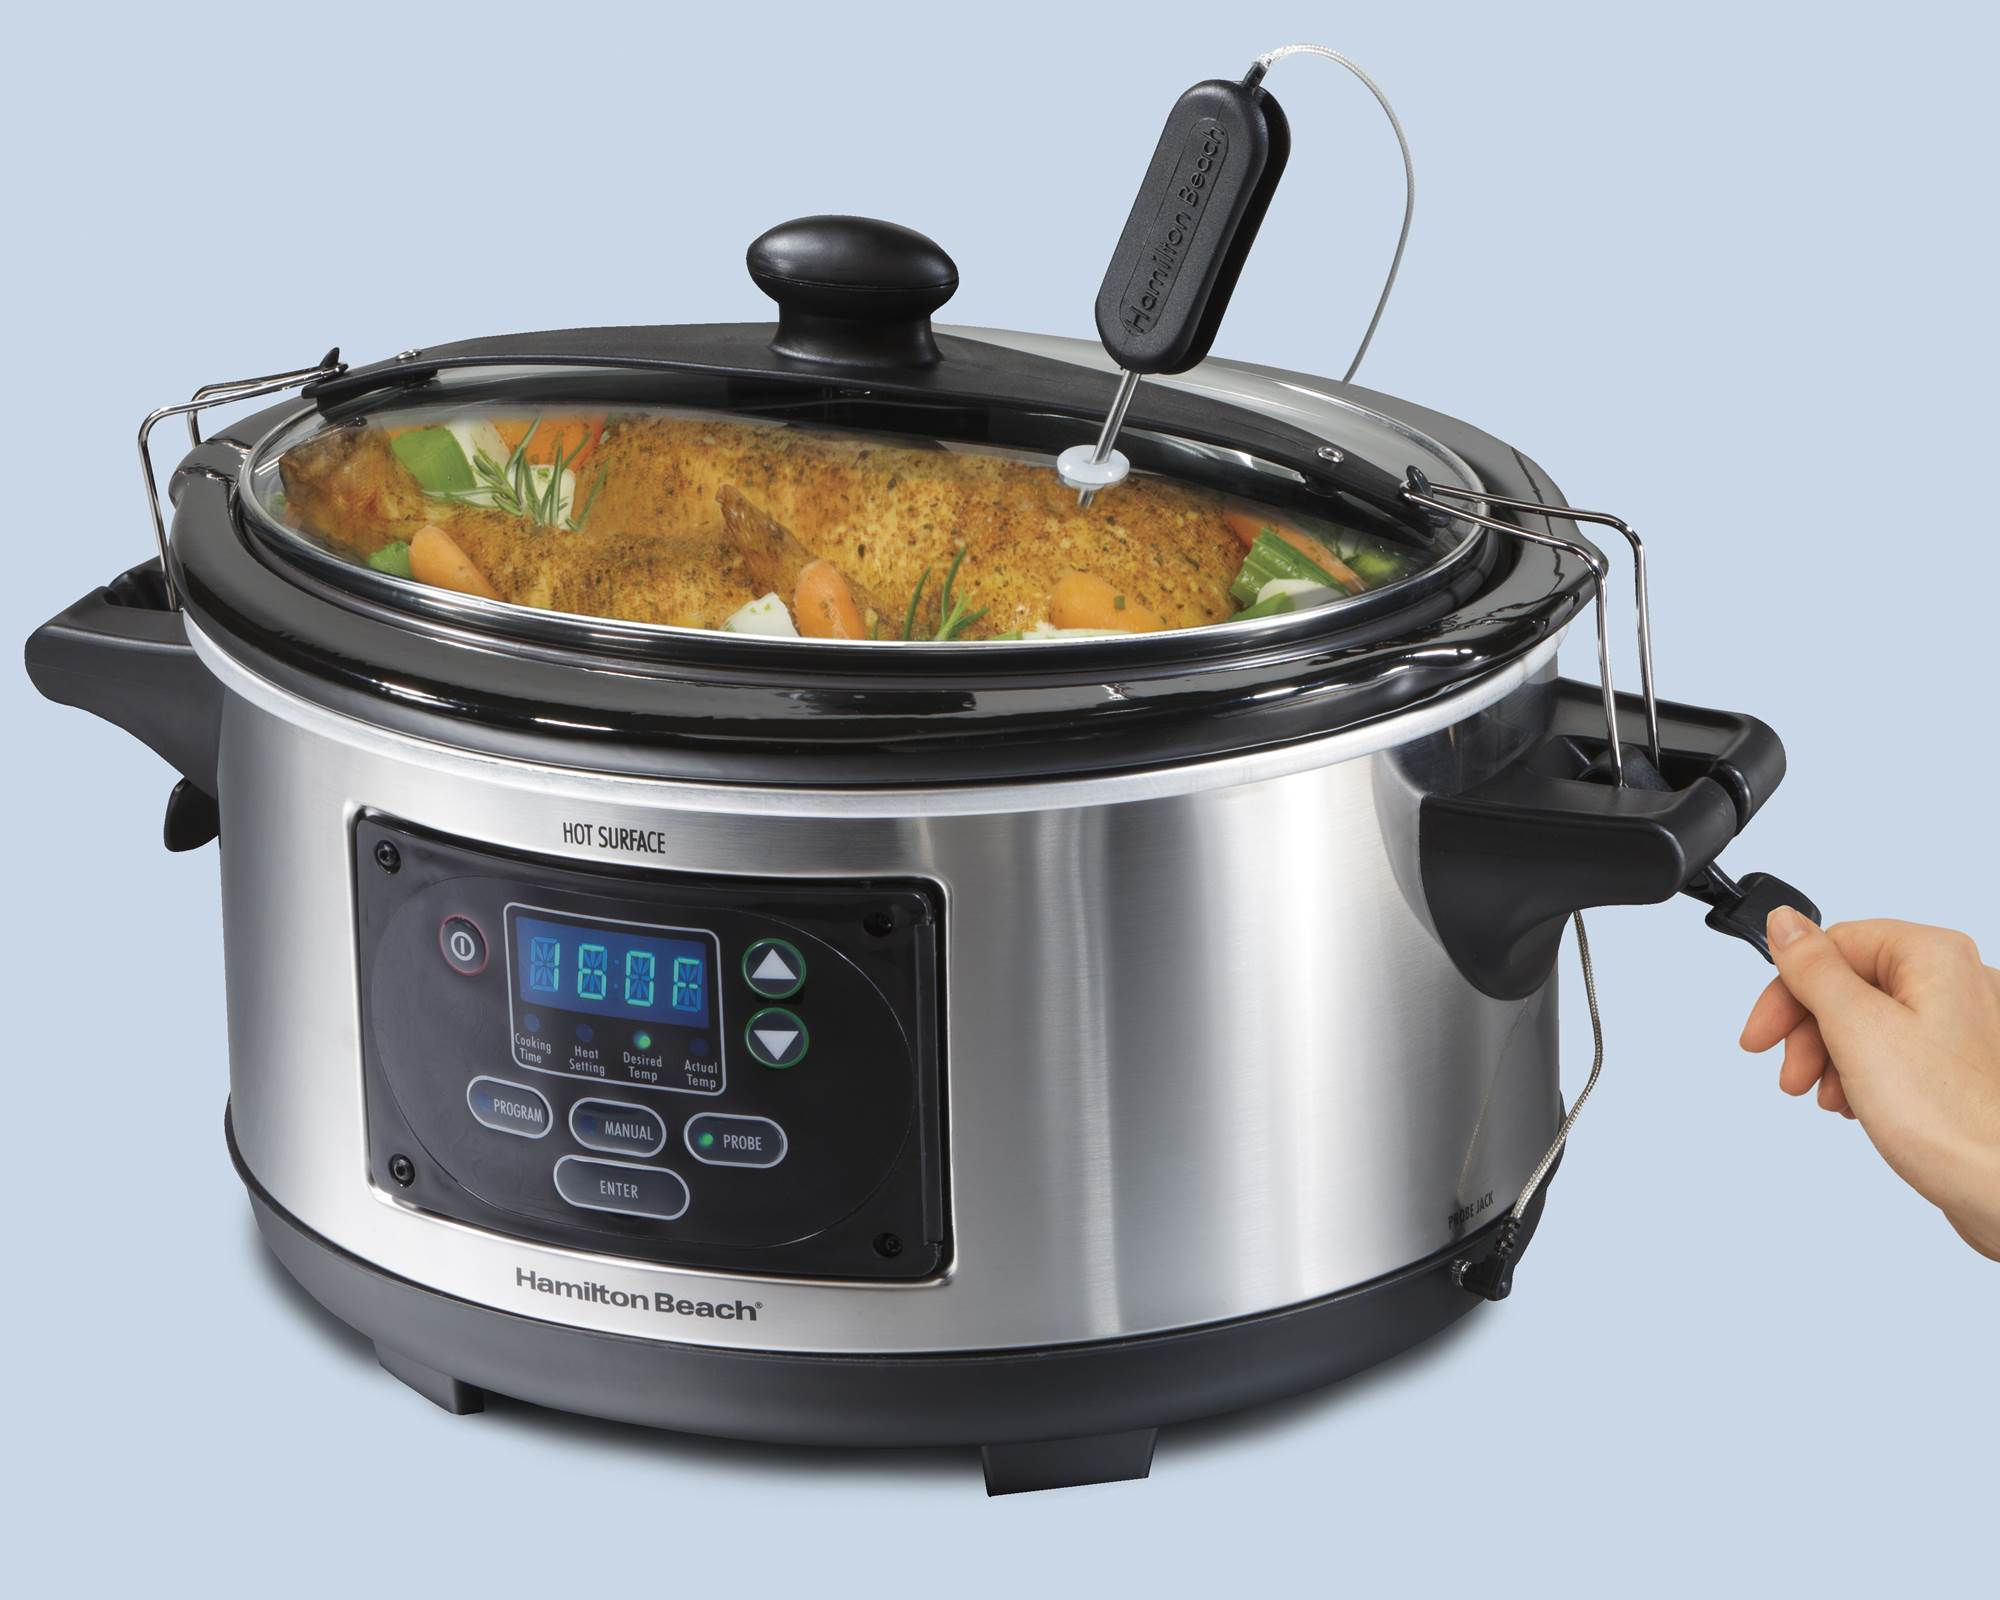 Hamilton Beach Set & Forget 6 qt. Brushed Metallic Programmable Slow Cooker - image 2 of 11